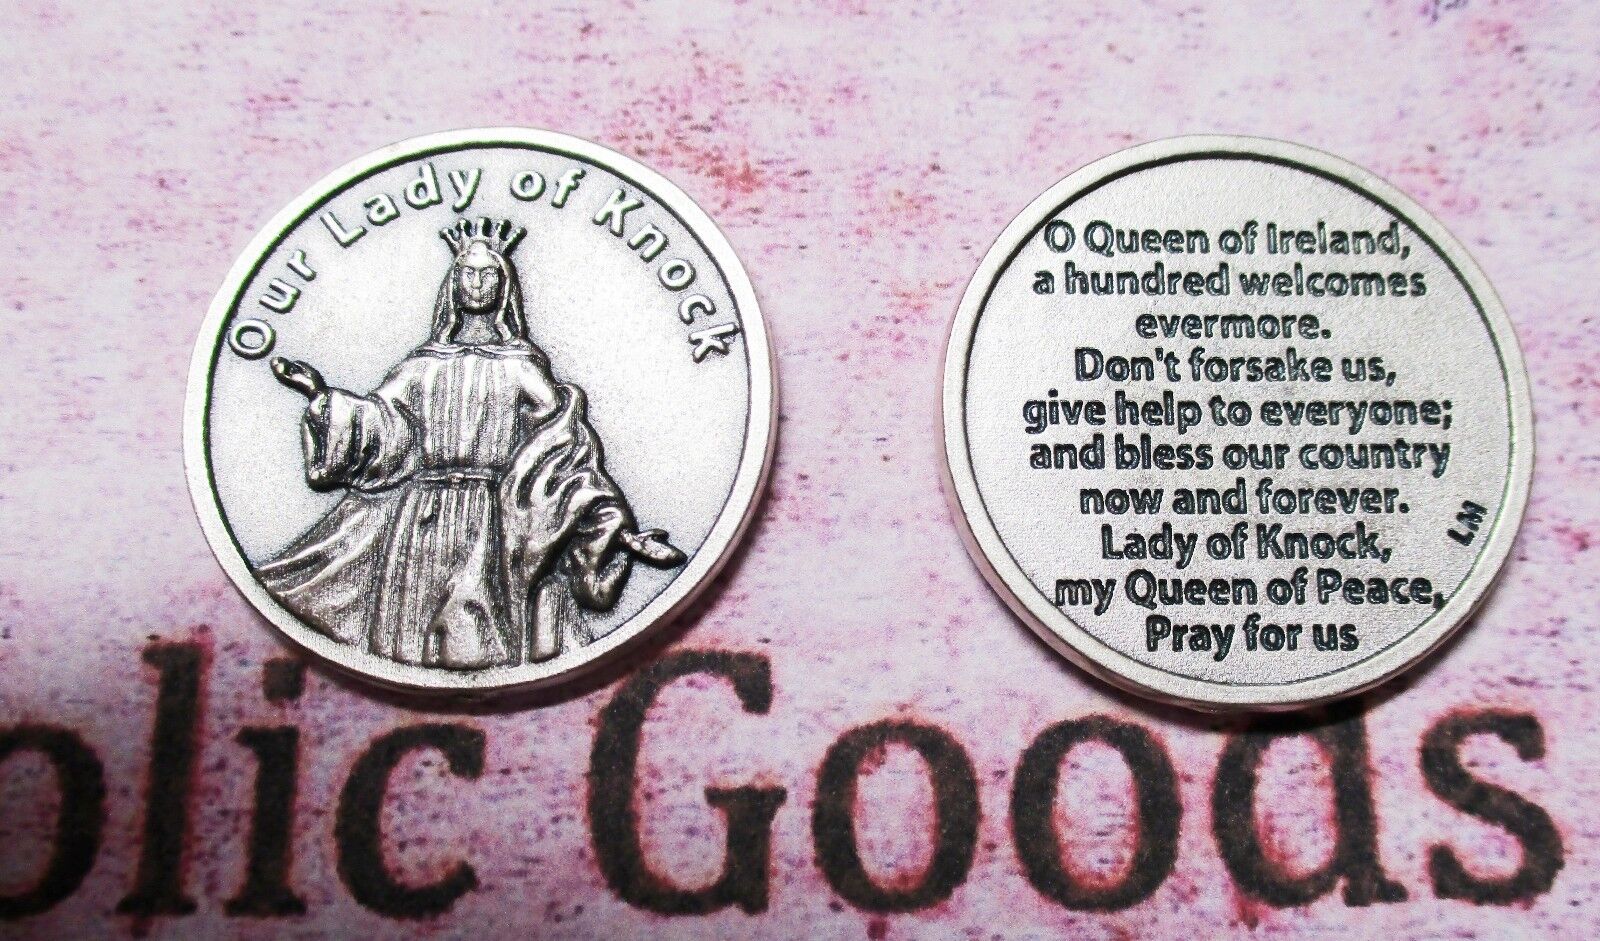 Our Lady of Knock - Prayer to Our Lady of Knock - Pocket Coin 